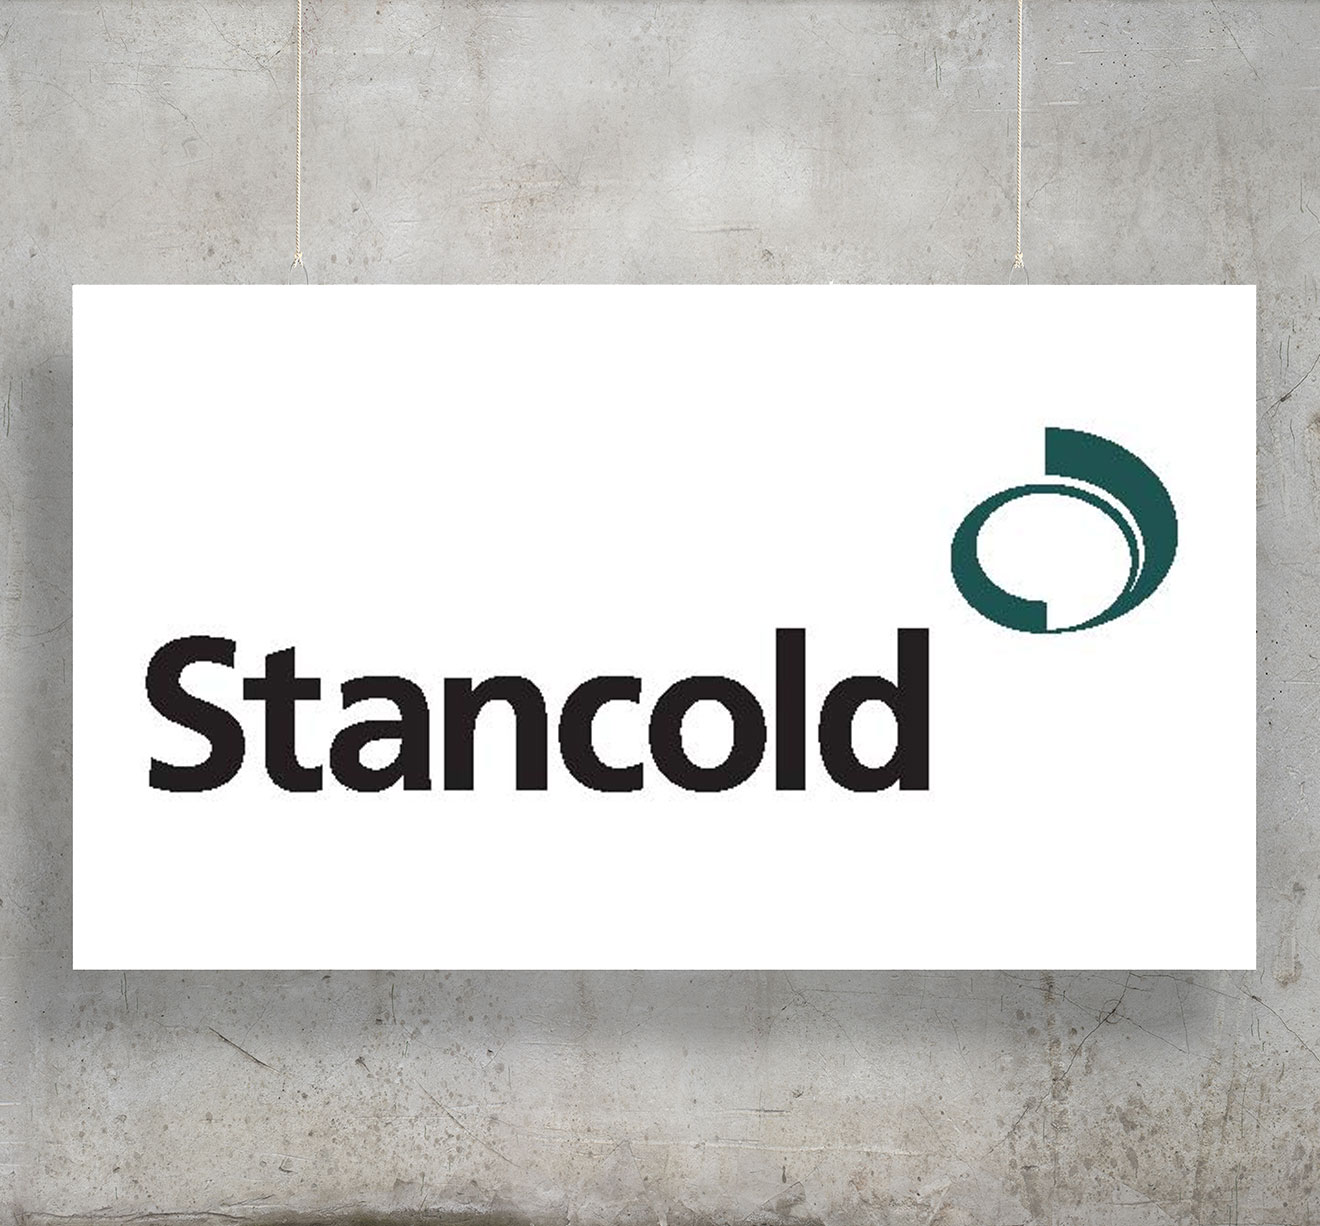 Stancold